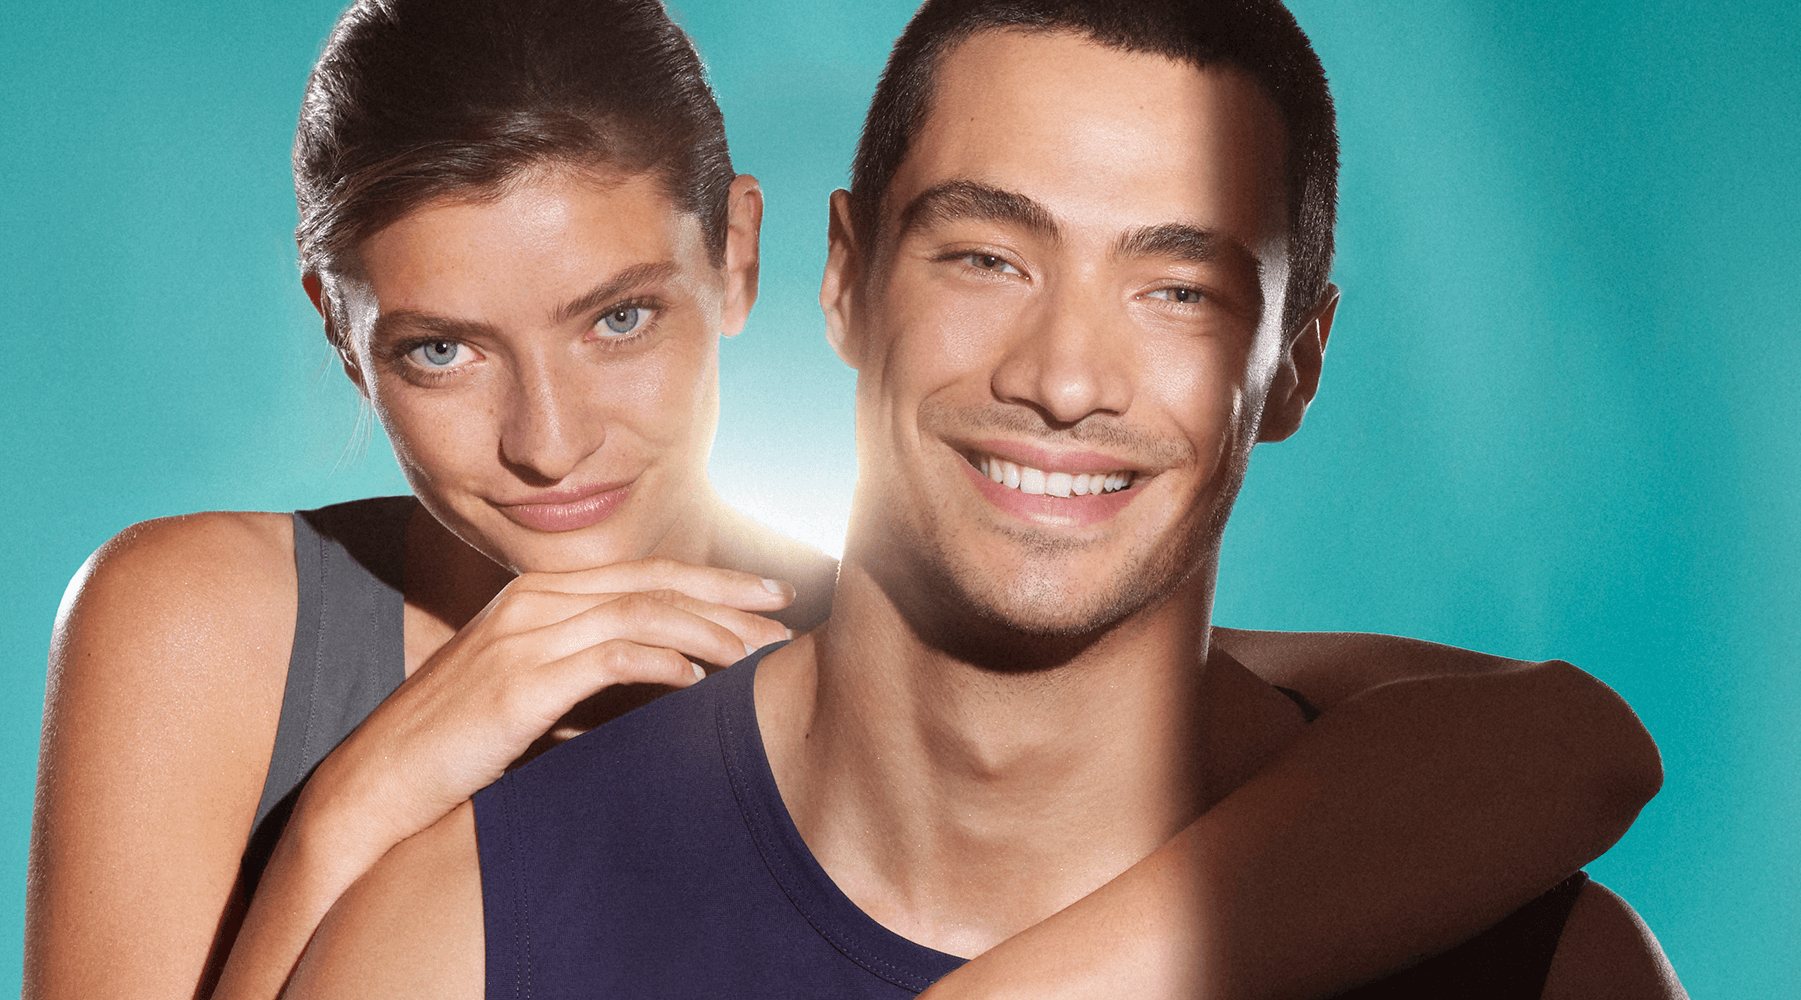 Close up of a woman and man, both of their faces show clear, blemish-free skin. They